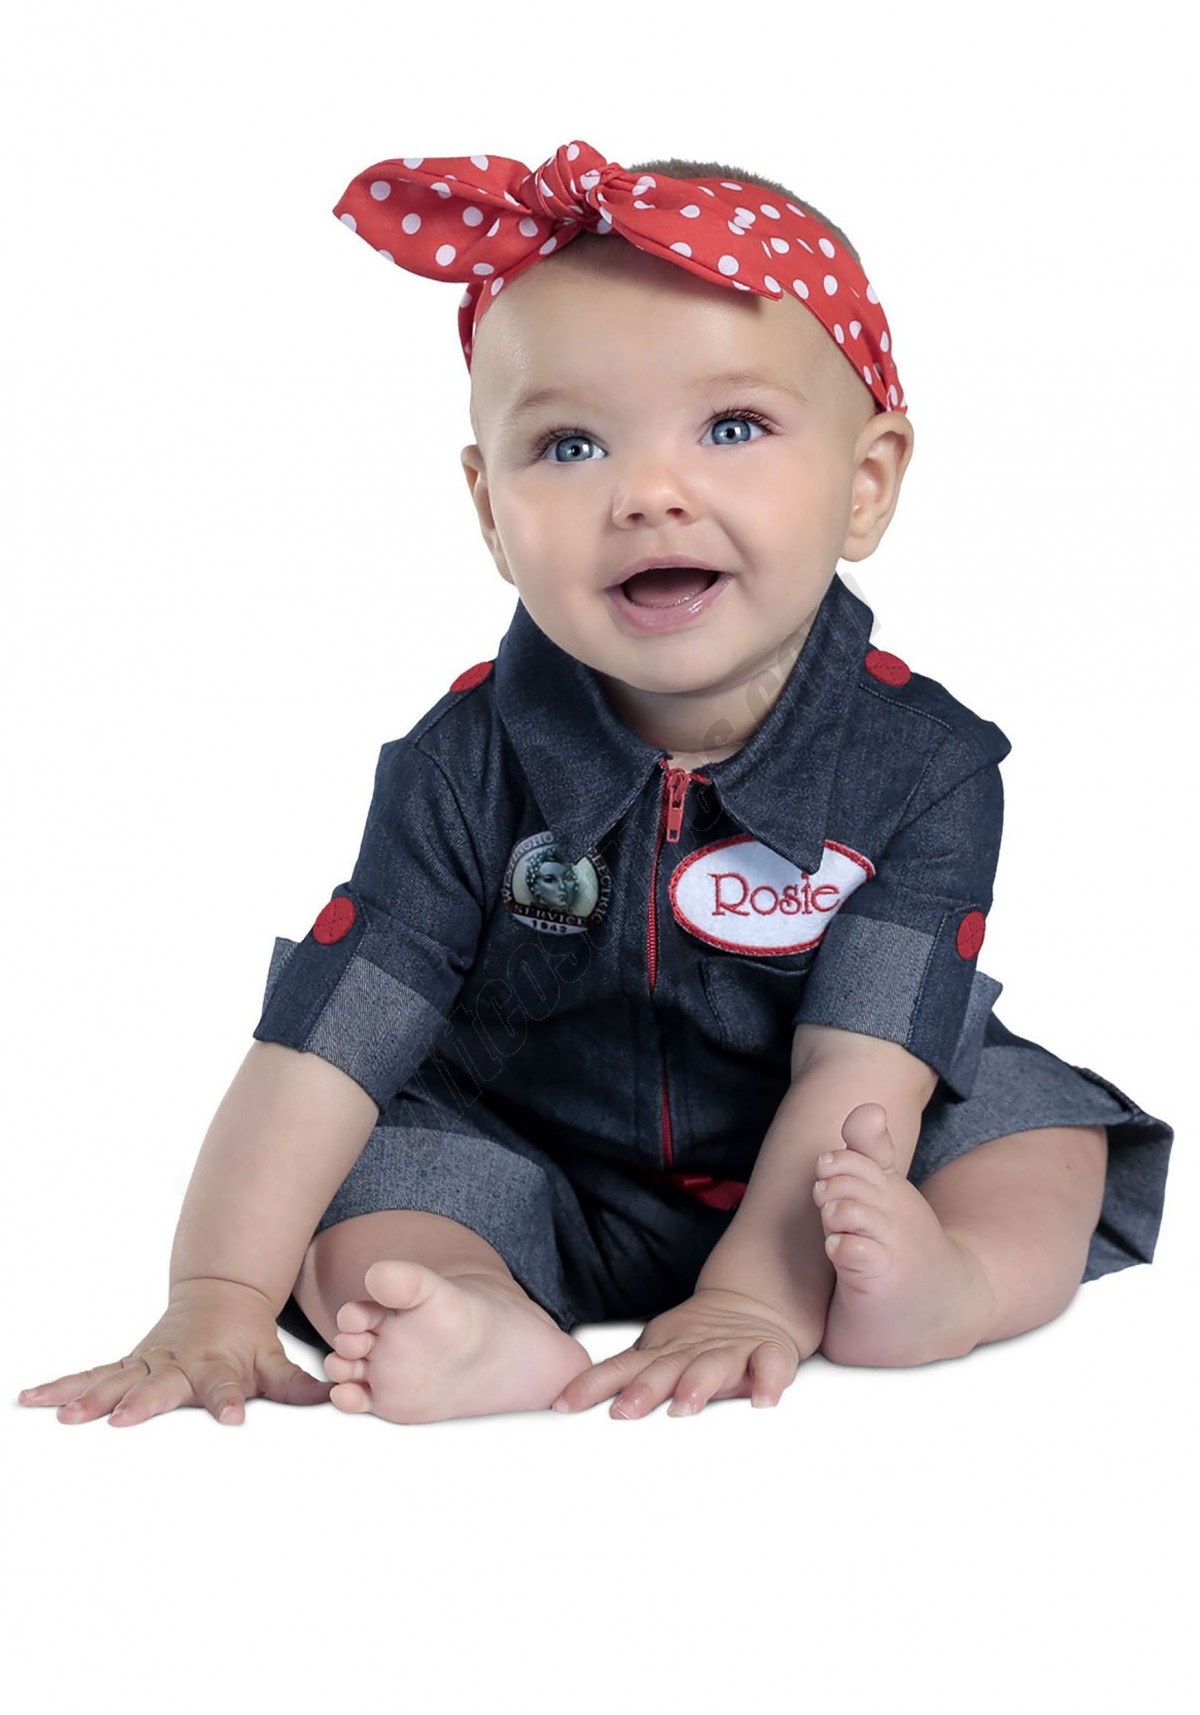 Rosie the Riveter Costume For baby Promotions - -0